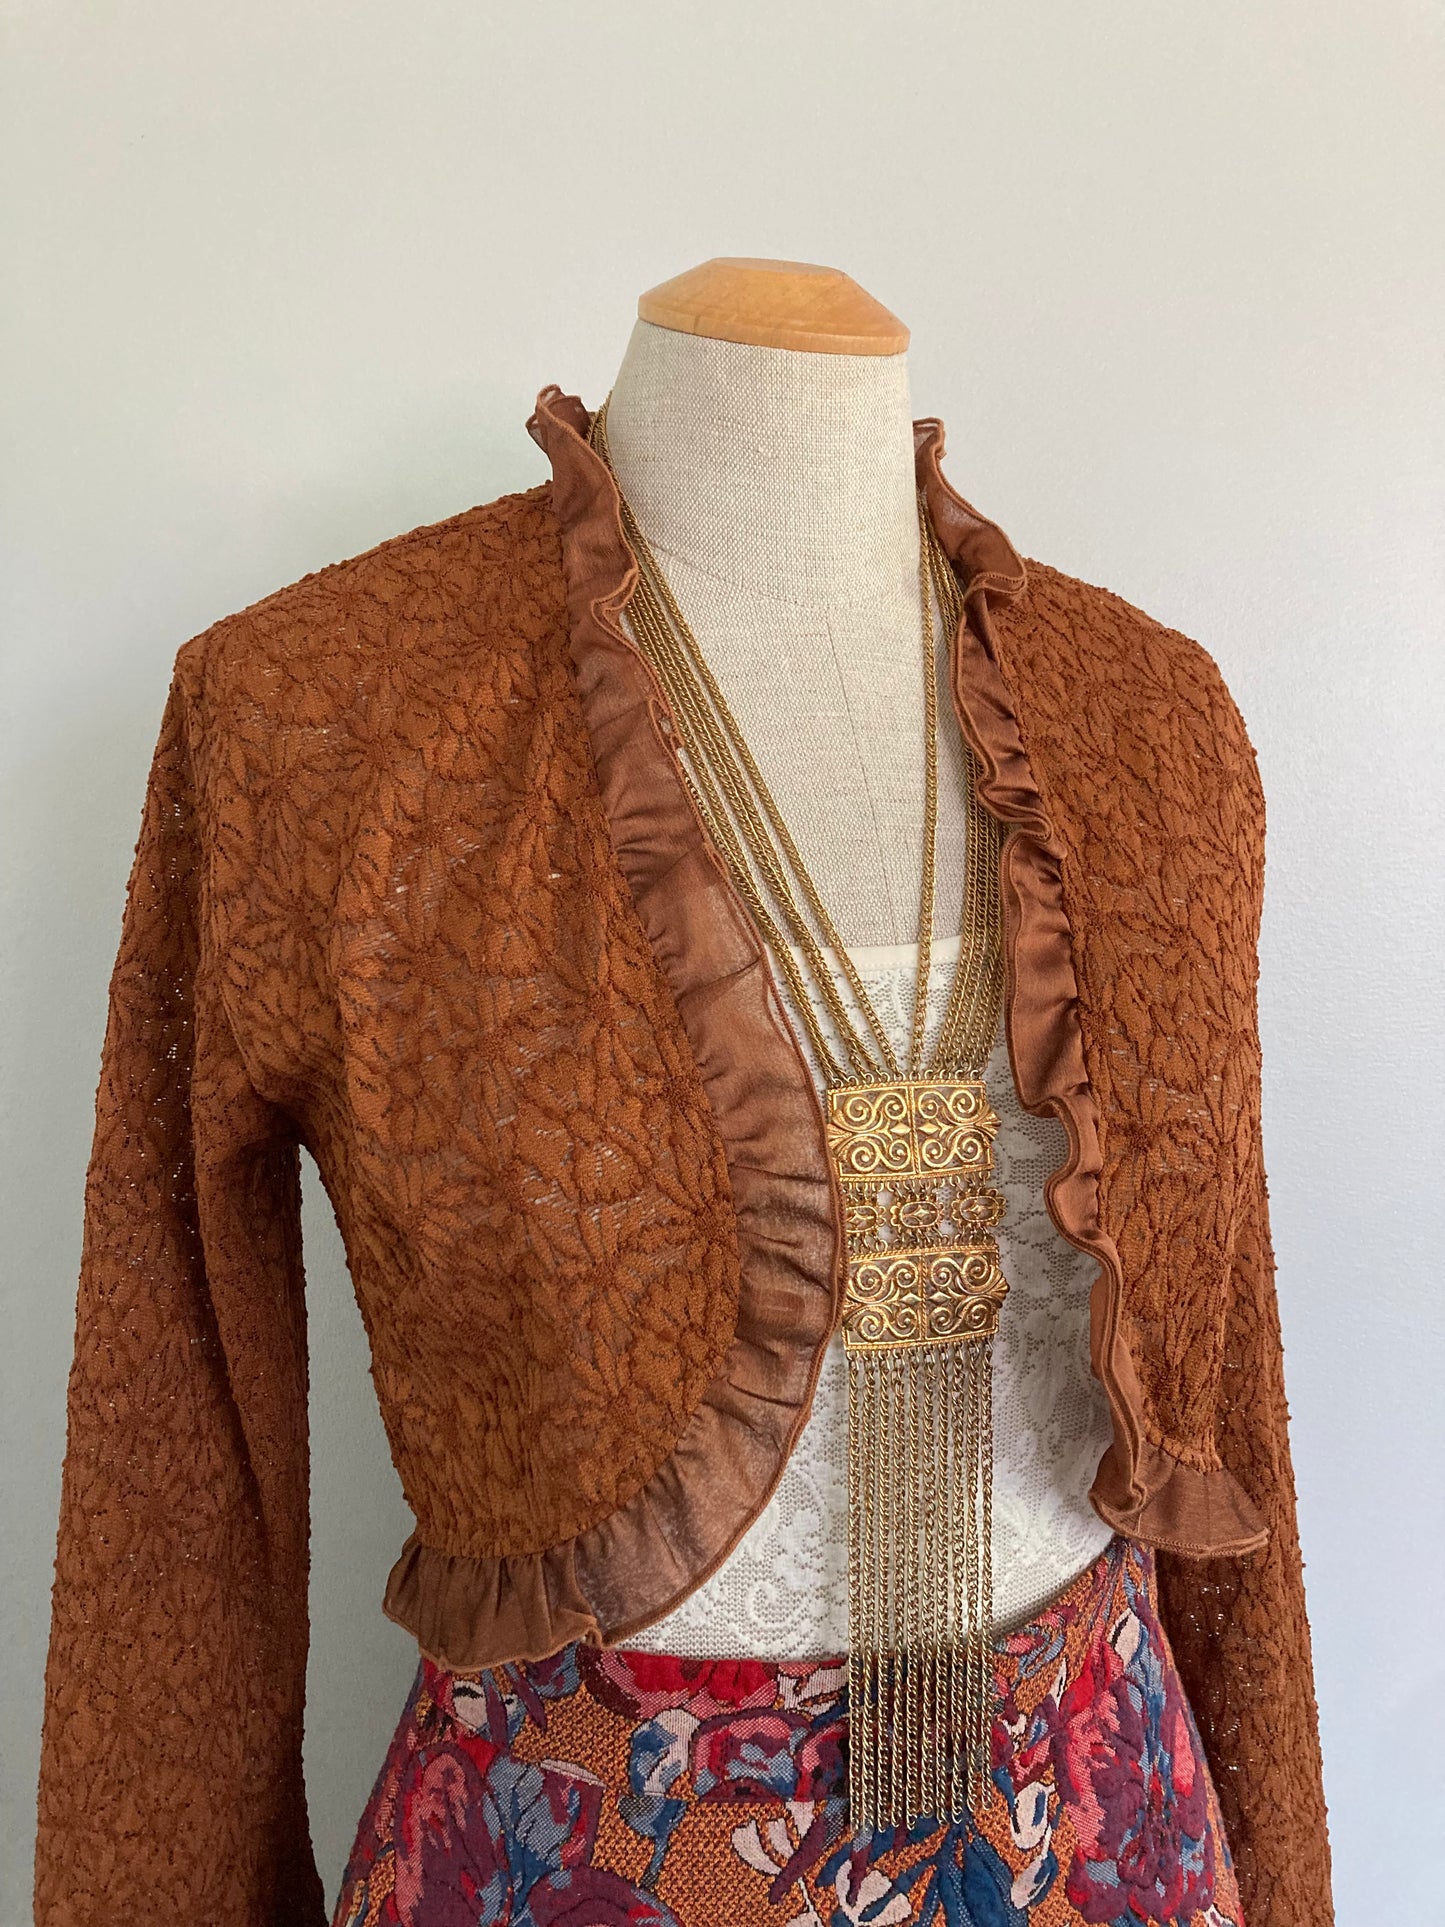 Lace Bolero with Bell Sleeves, Size M